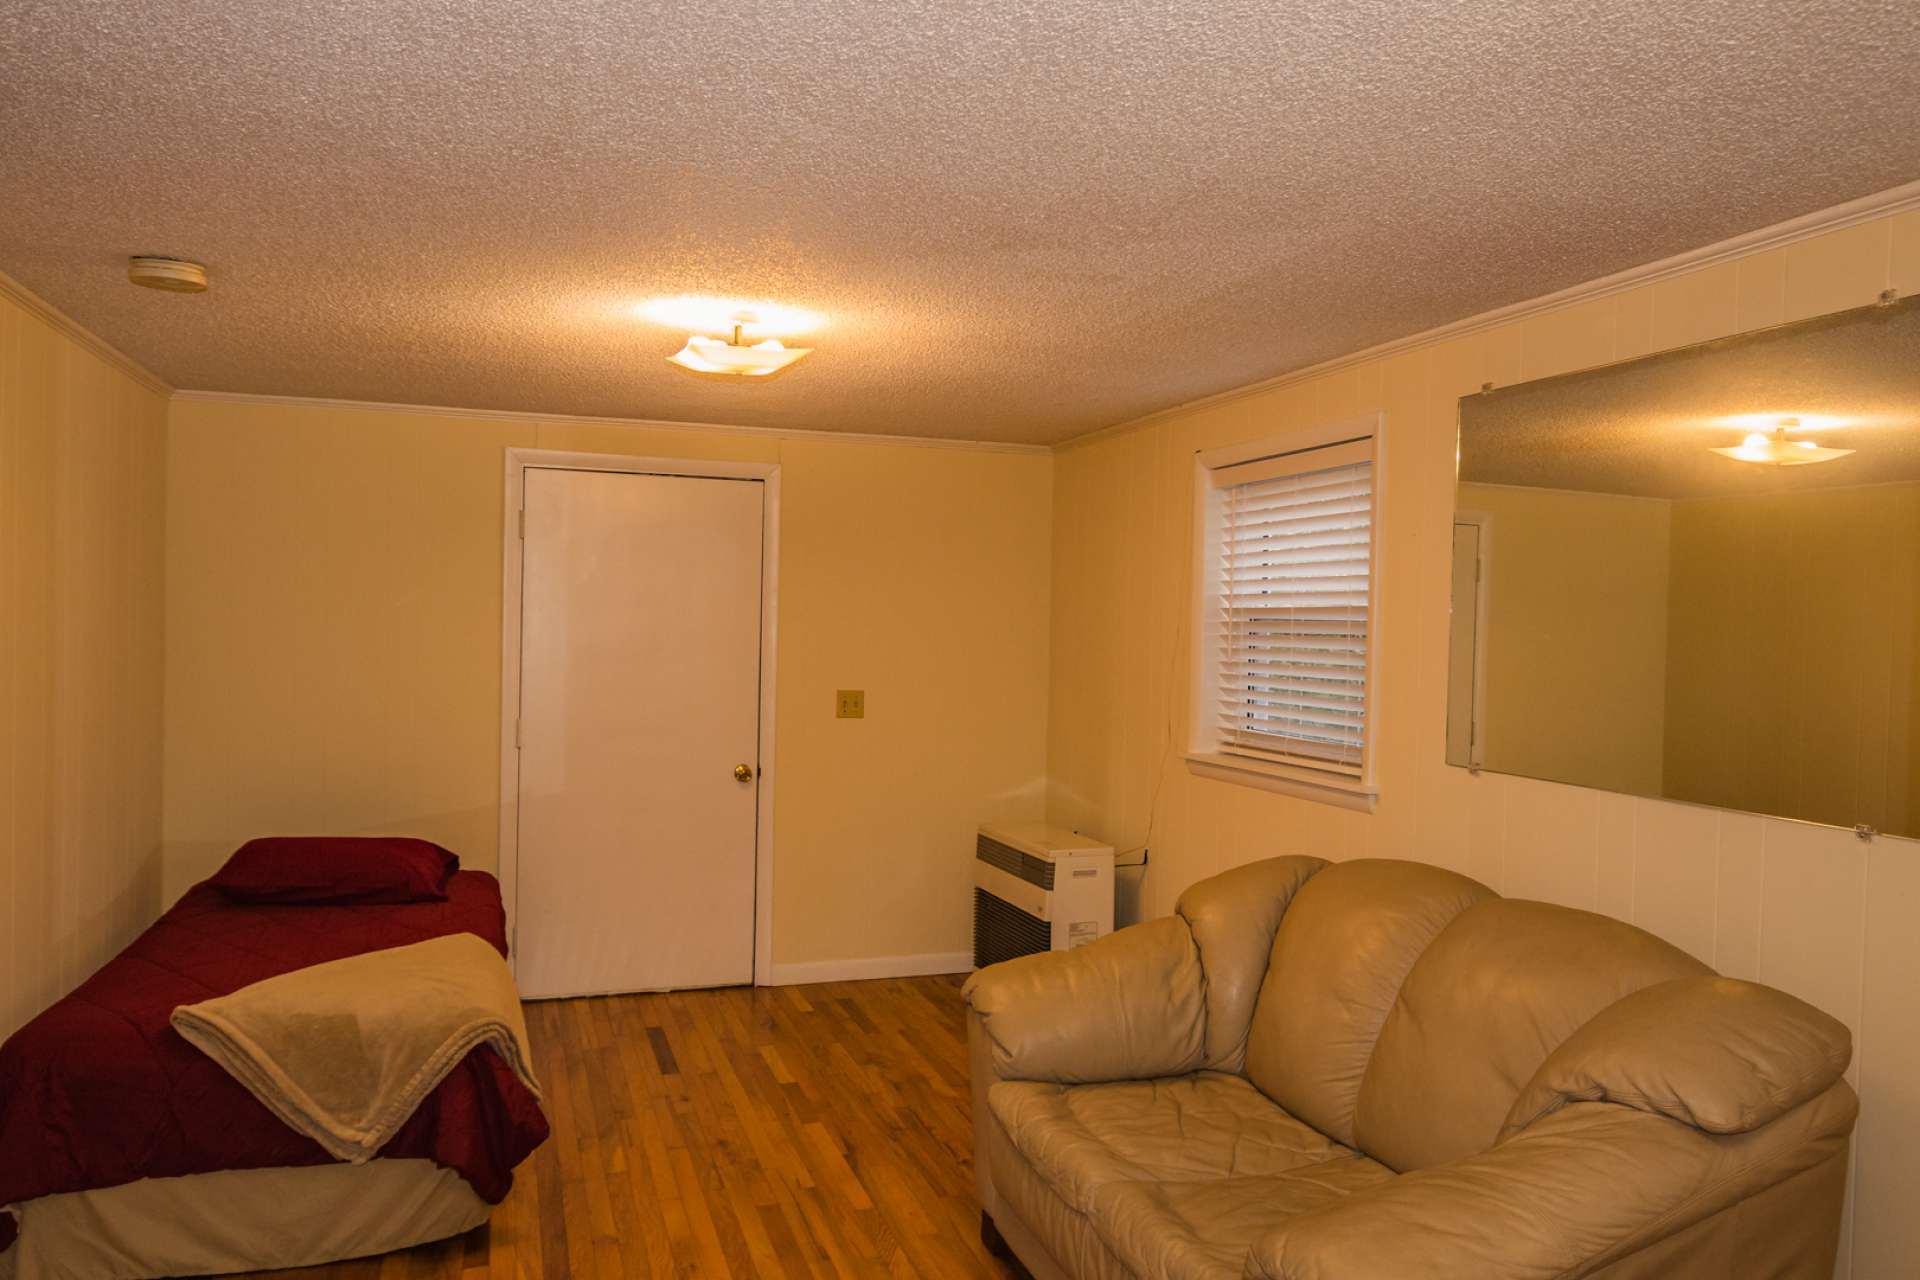 The full finished walk-out lower level features a family room, game room, bonus room, and laundry area.